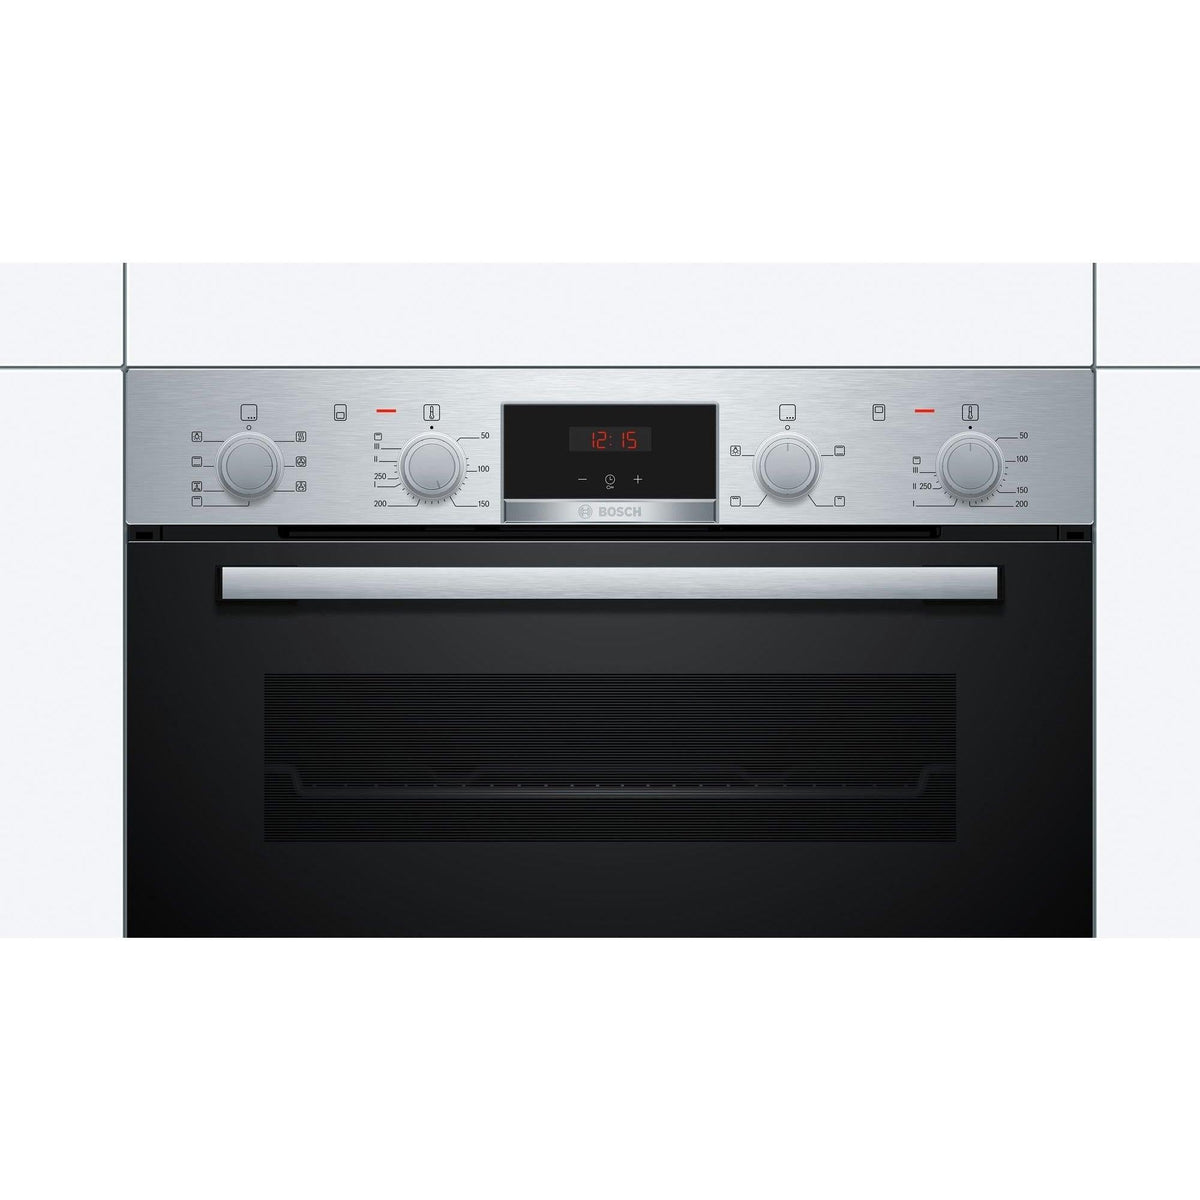 Bosch Serie 4 Built-In Electric Double Oven - Stainless Steel | MBS533BS0B from DID Electrical - guaranteed Irish, guaranteed quality service. (6890787012796)